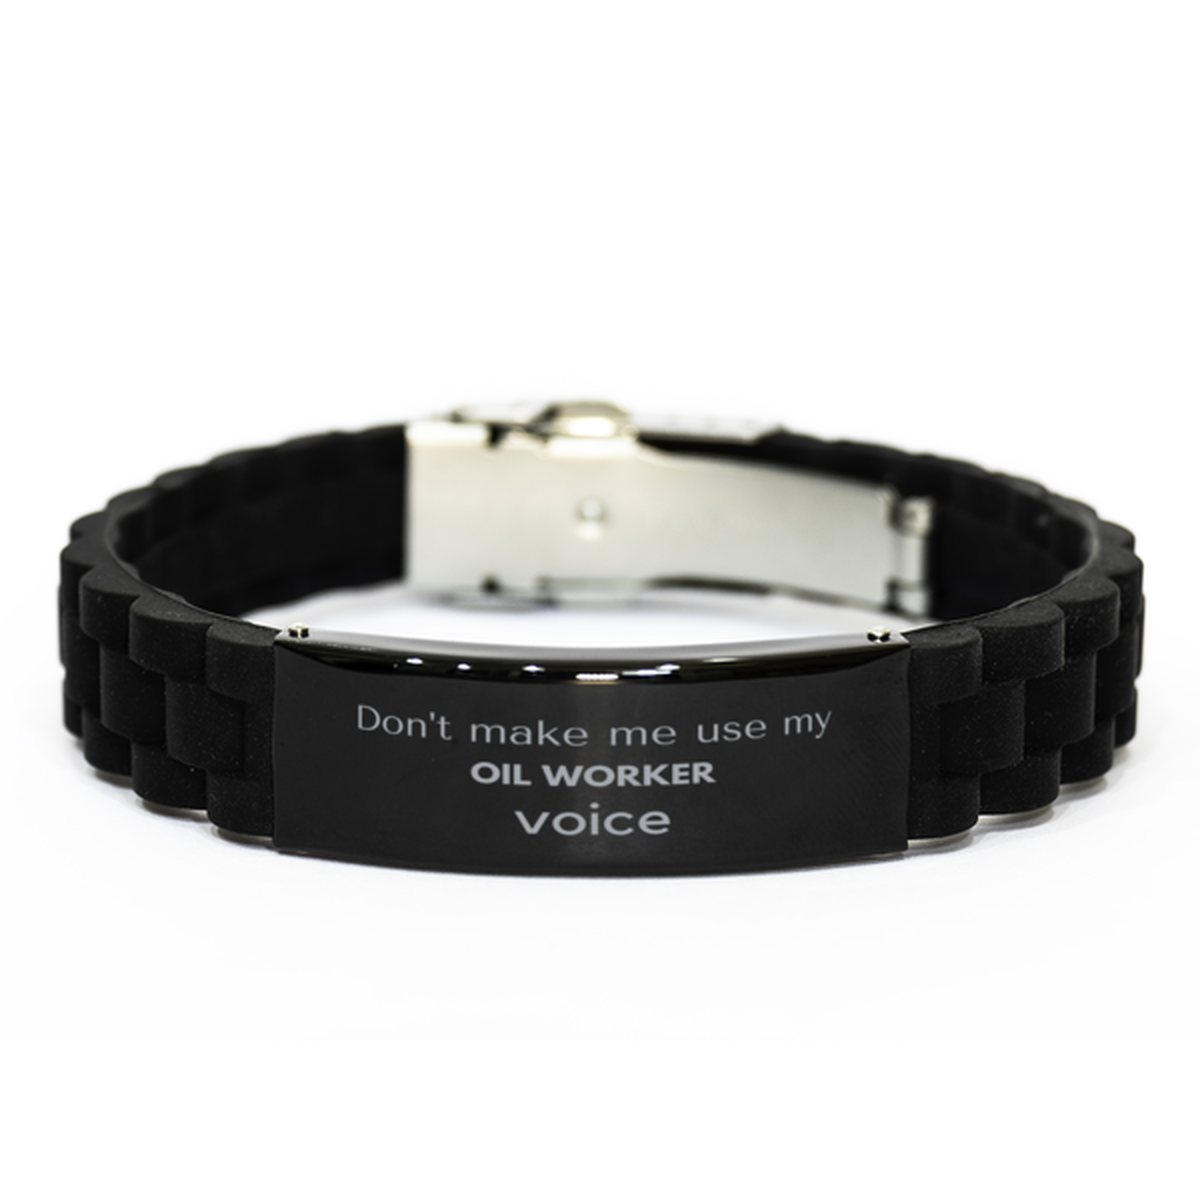 Don't make me use my Oil Worker voice, Sarcasm Oil Worker Gifts, Christmas Oil Worker Black Glidelock Clasp Bracelet Birthday Unique Gifts For Oil Worker Coworkers, Men, Women, Colleague, Friends